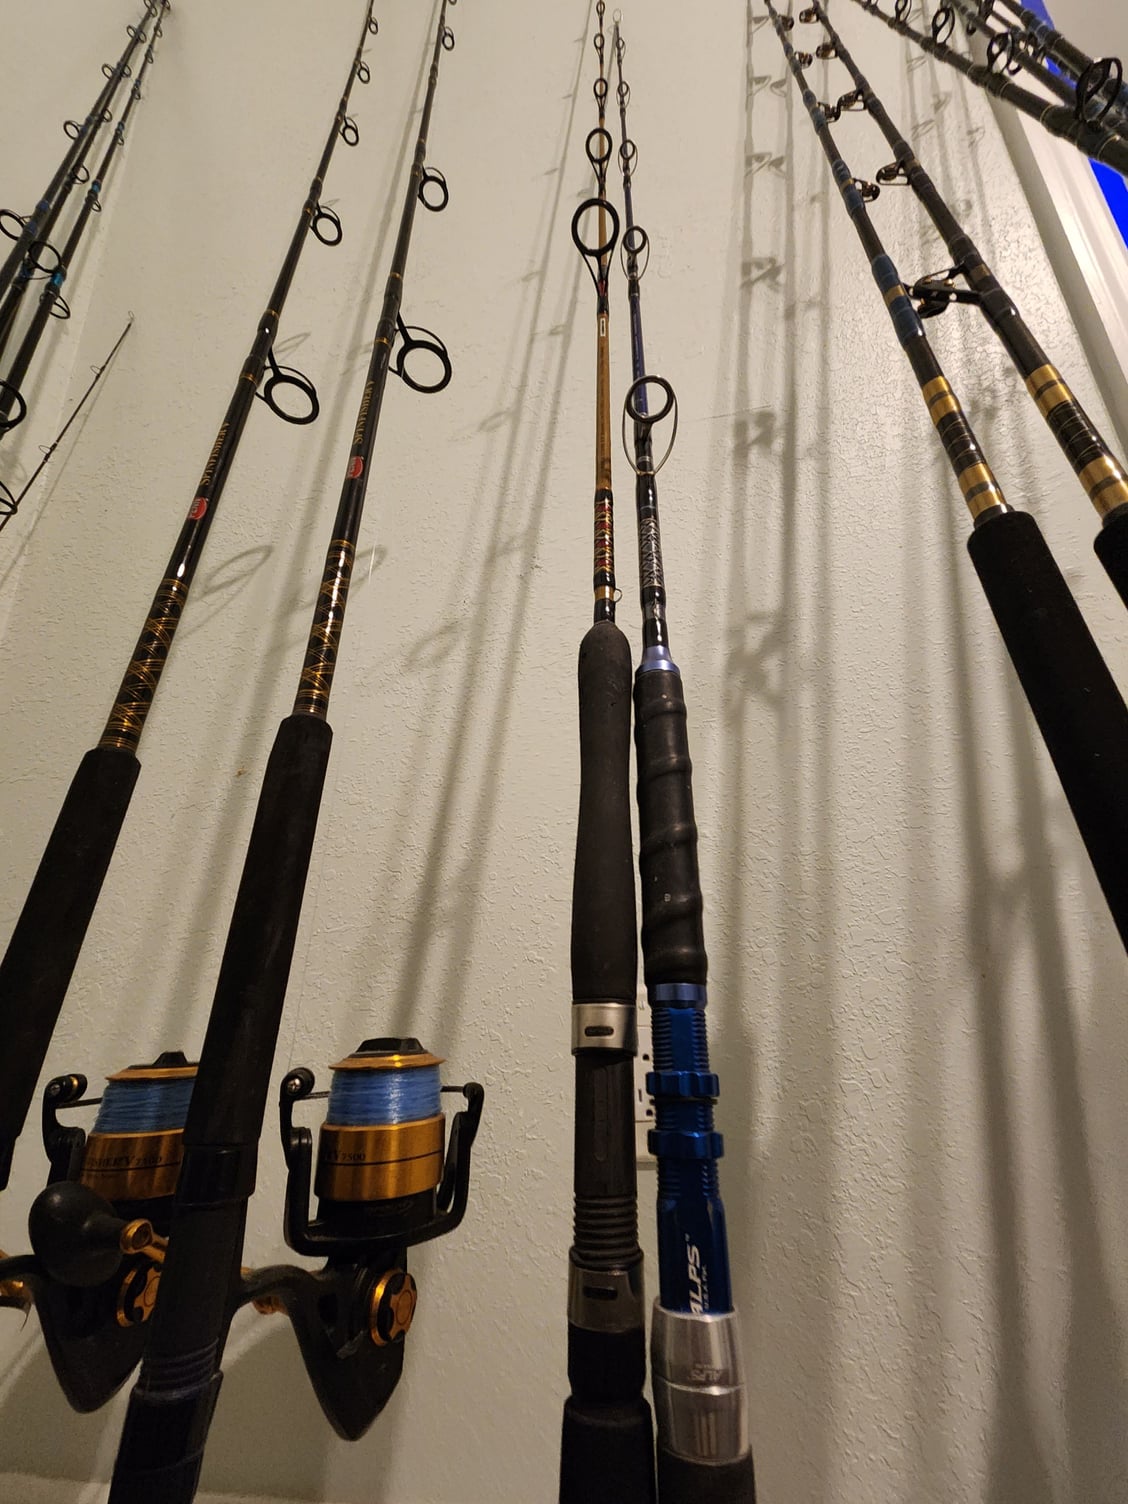 Wts trolling lures - The Hull Truth - Boating and Fishing Forum